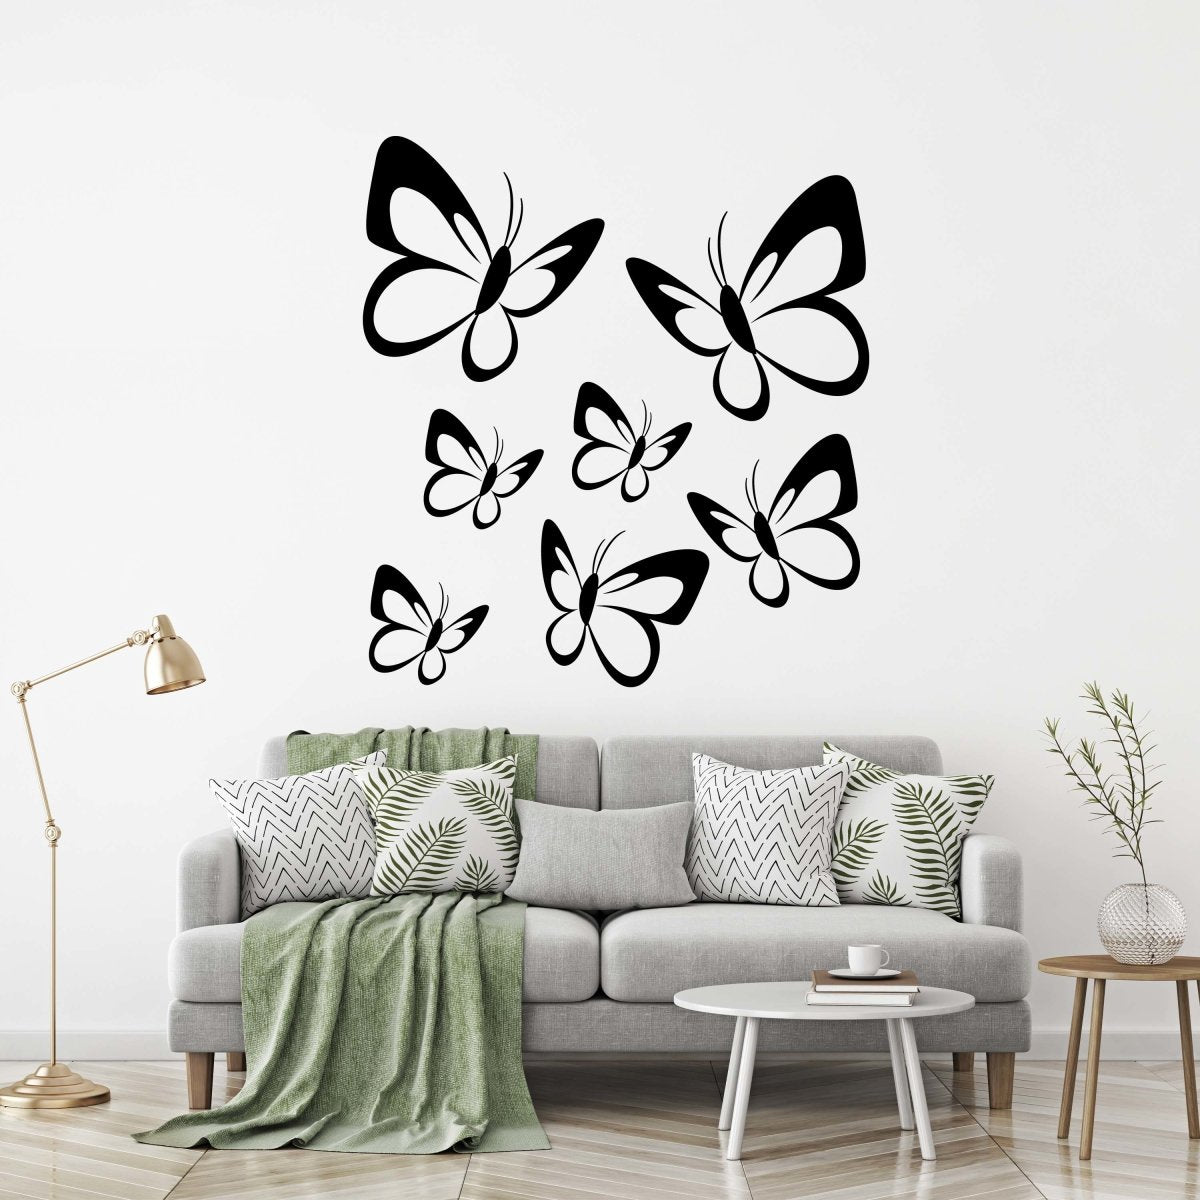 Discover the Wall Tattoo Butterflies WT00000008